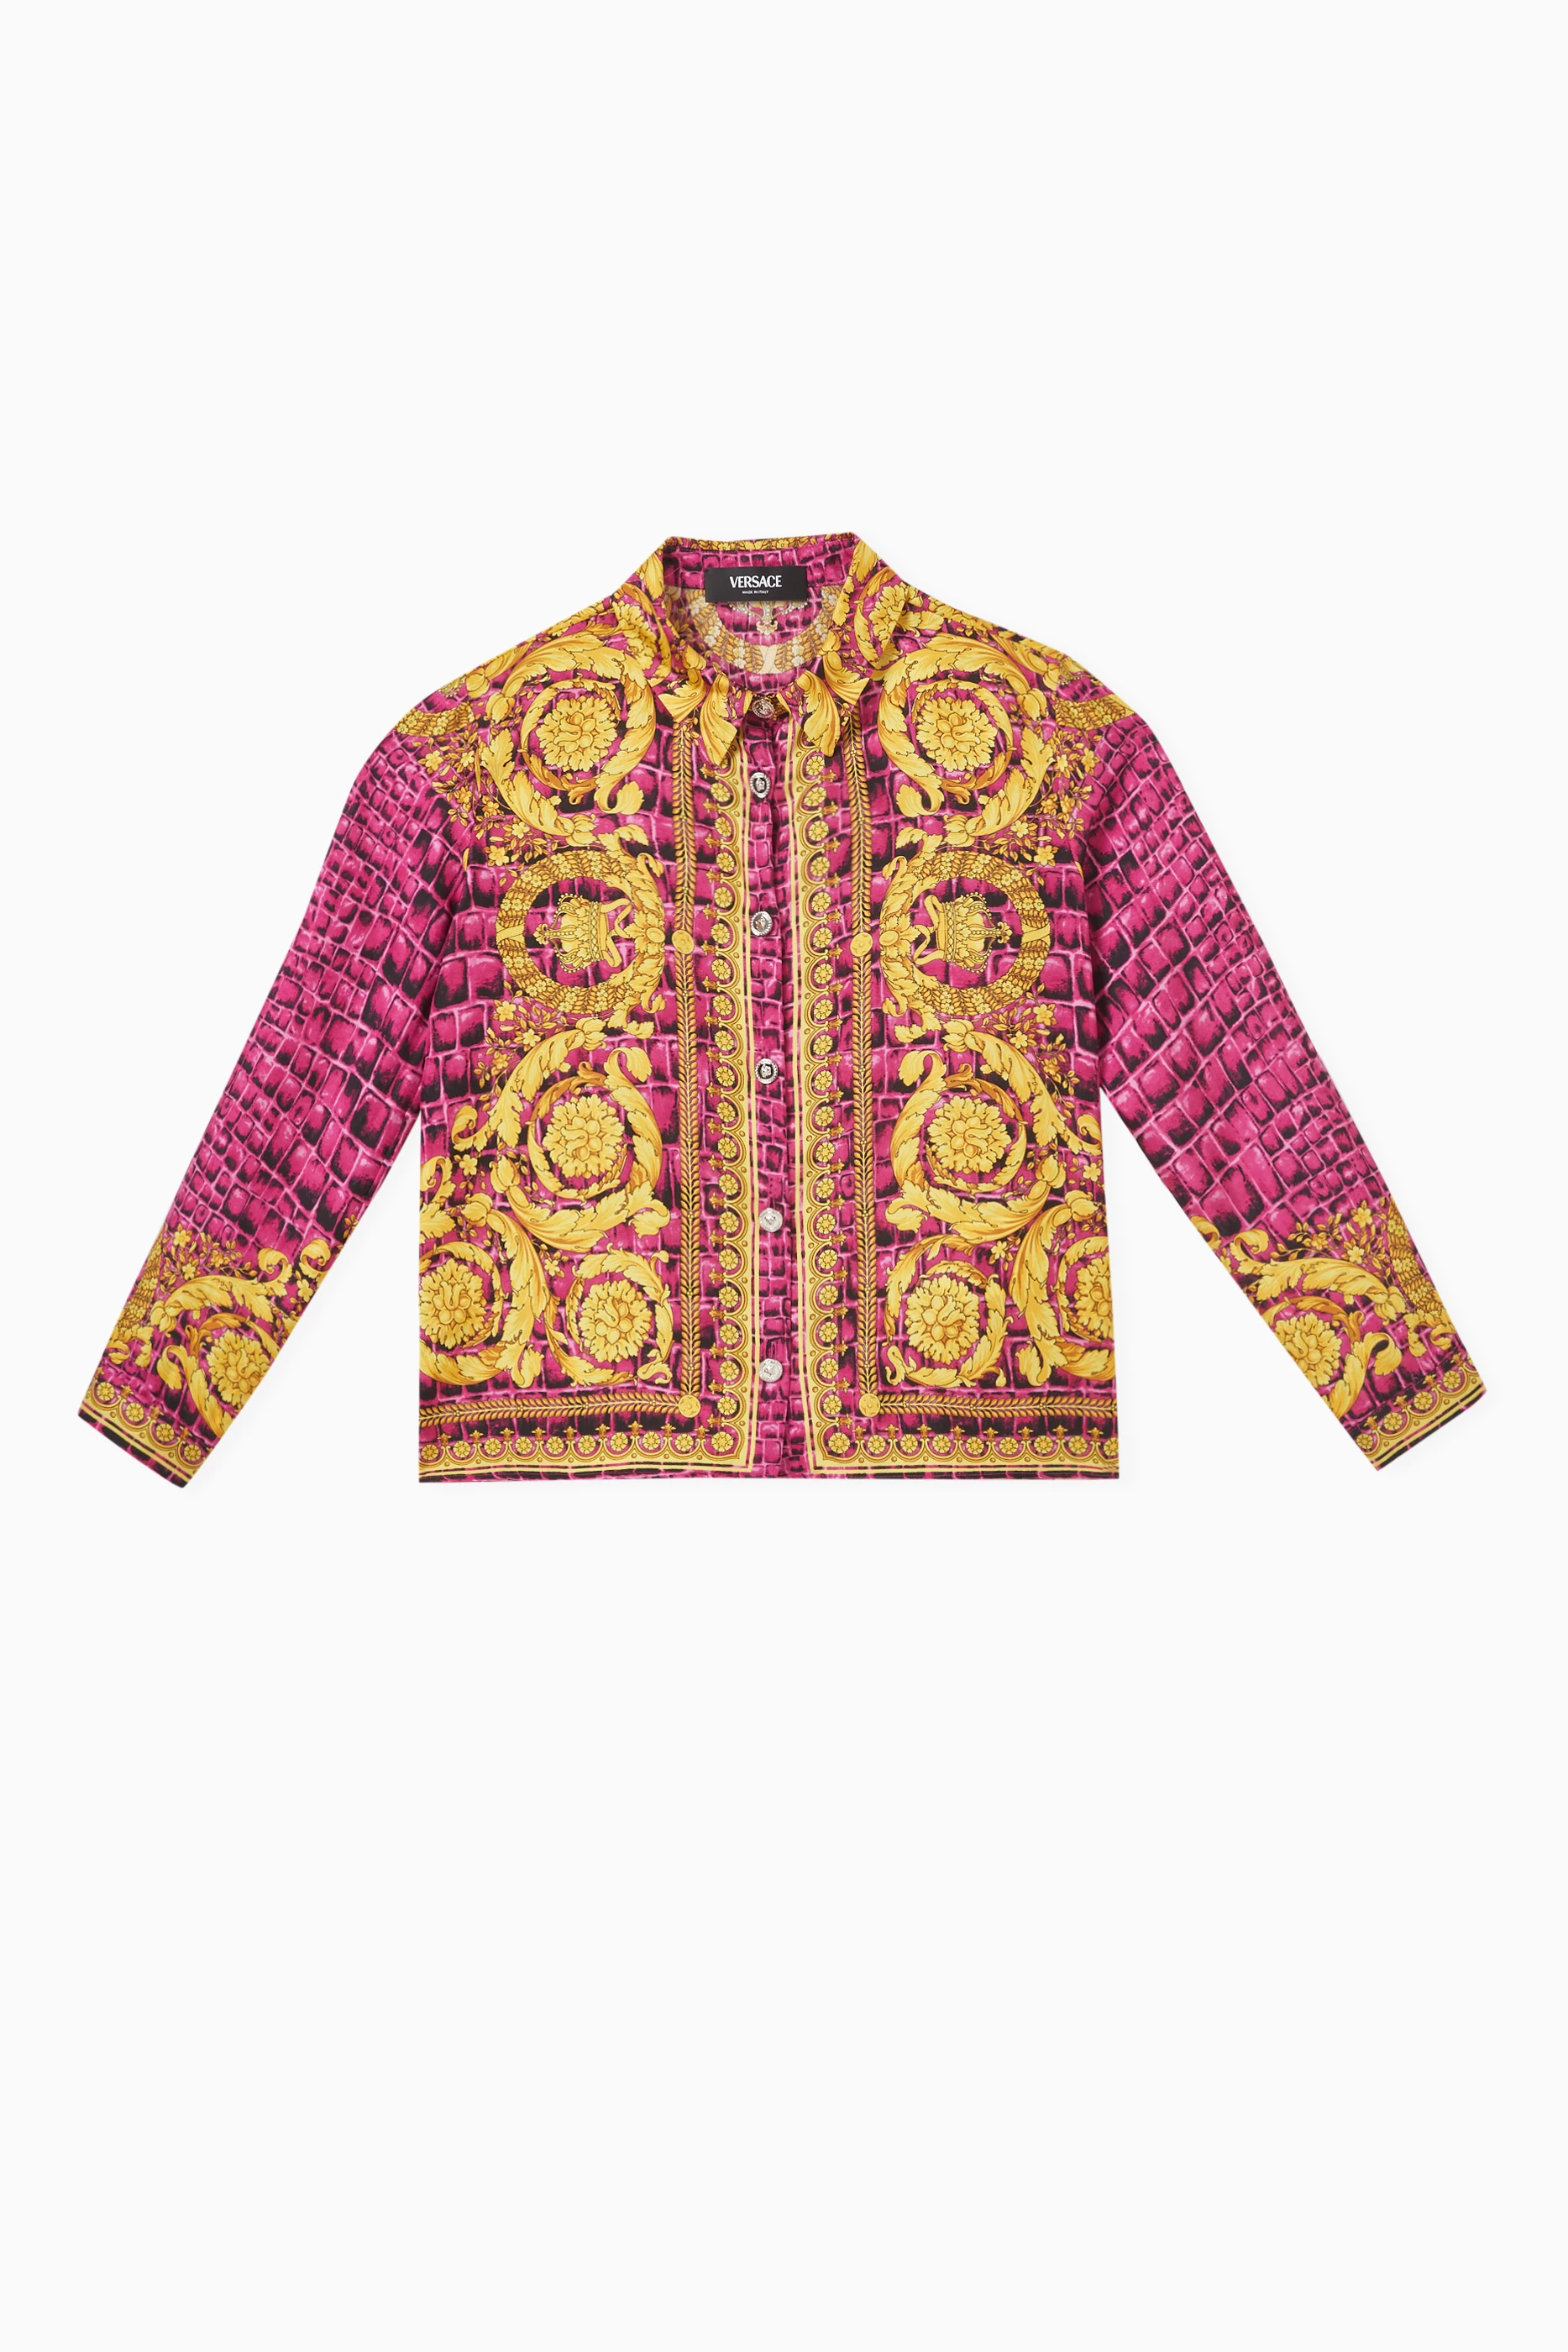 Buy Versace Multicolour Barocco-Print Shirt in Silk for Girls in